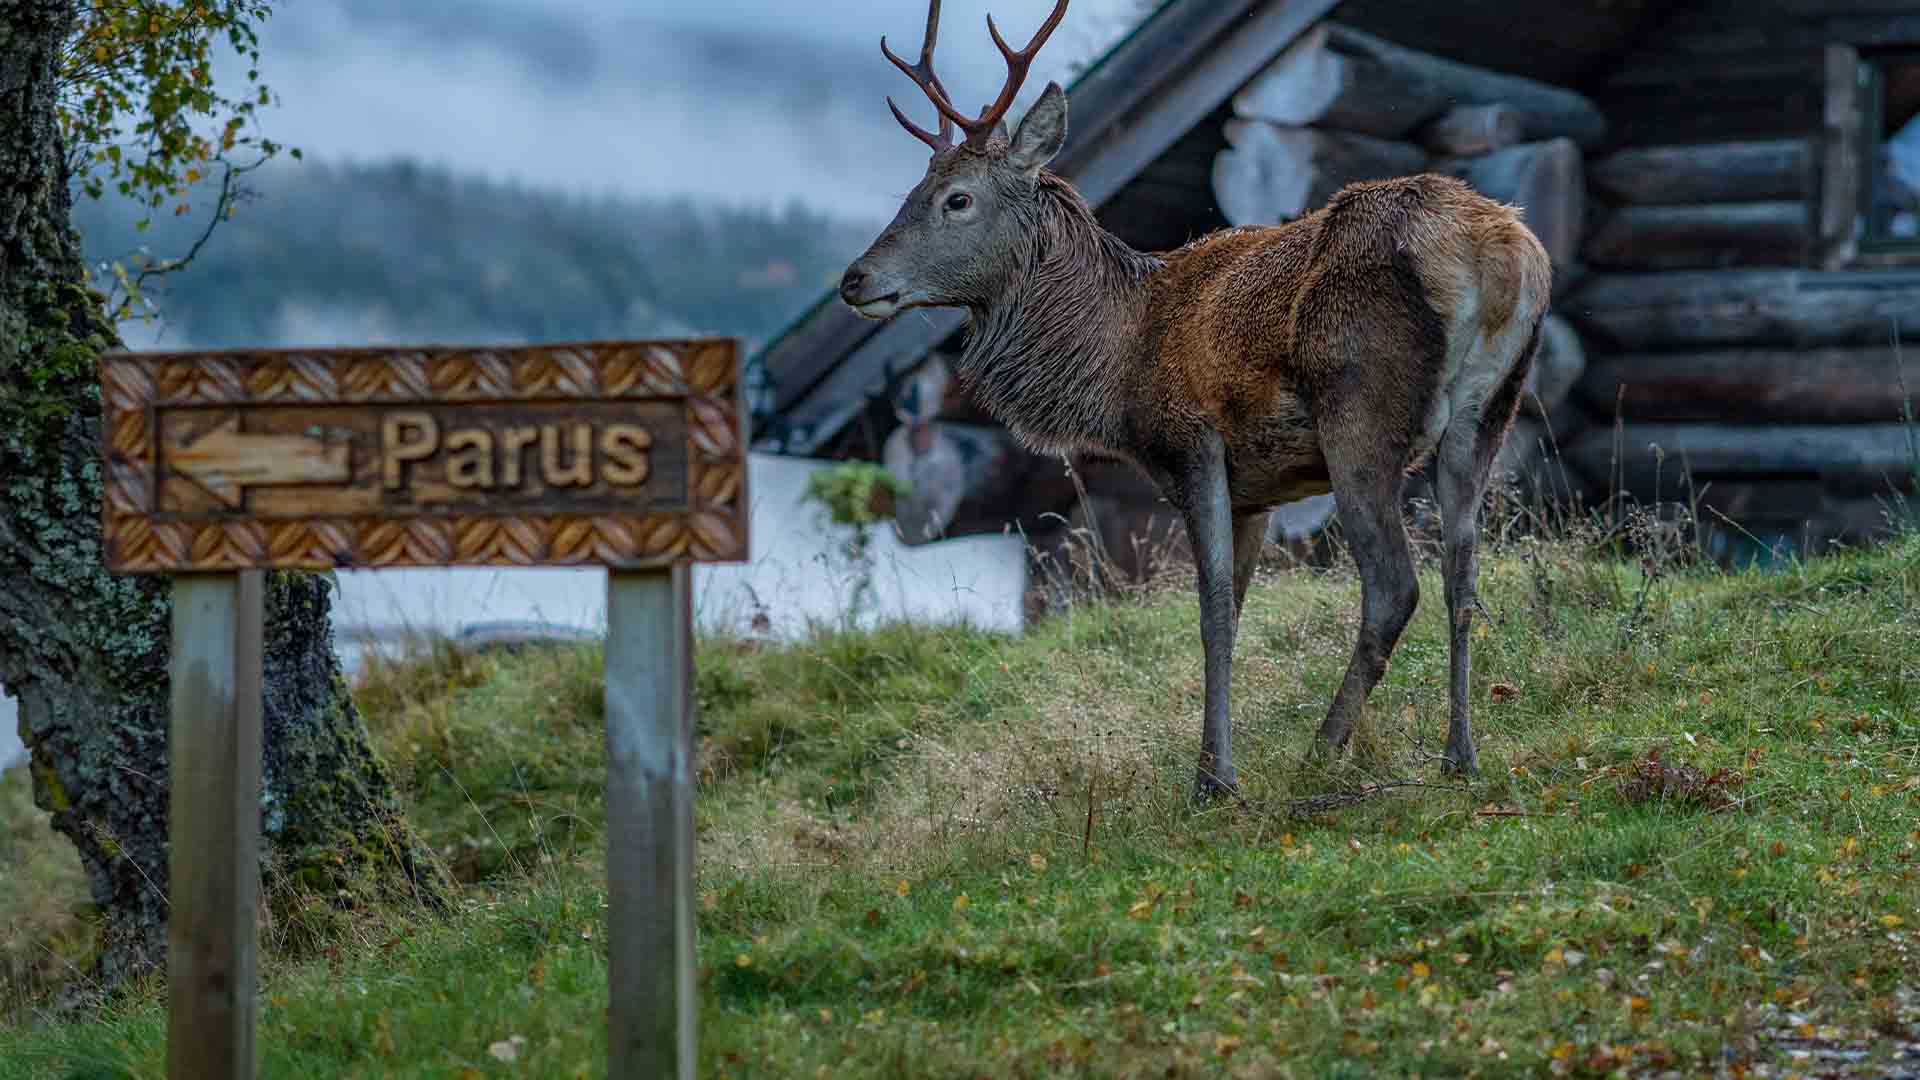 A red deer at the Parus cabin